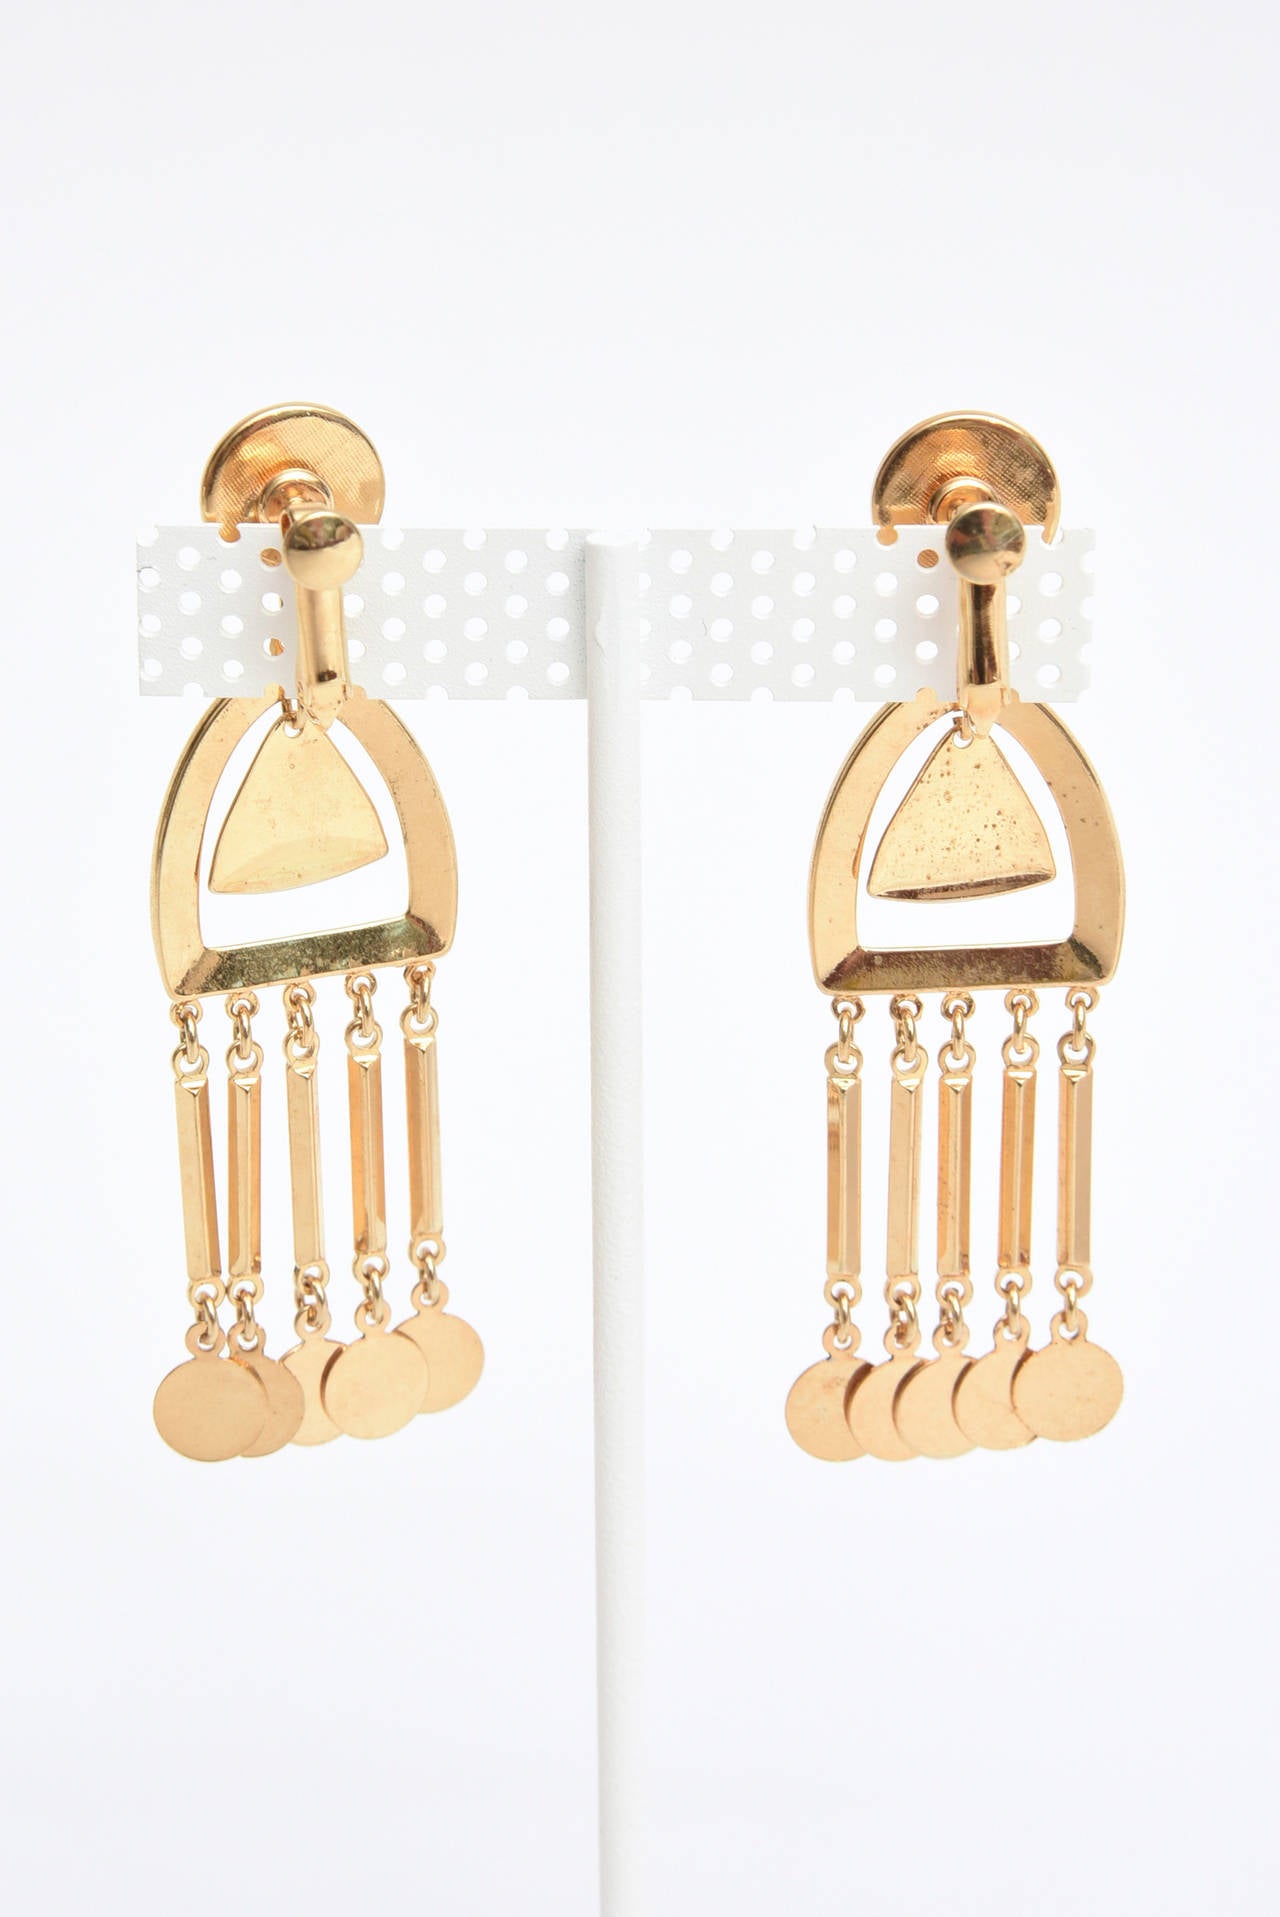 These fantastic vintage Vendome modernist dangle or chandelier pair of earrings are from the 60's. They are sculptural and attract the eye. They are gold plated. They have the scew backs. These still withstand 55 years when they were made and are so